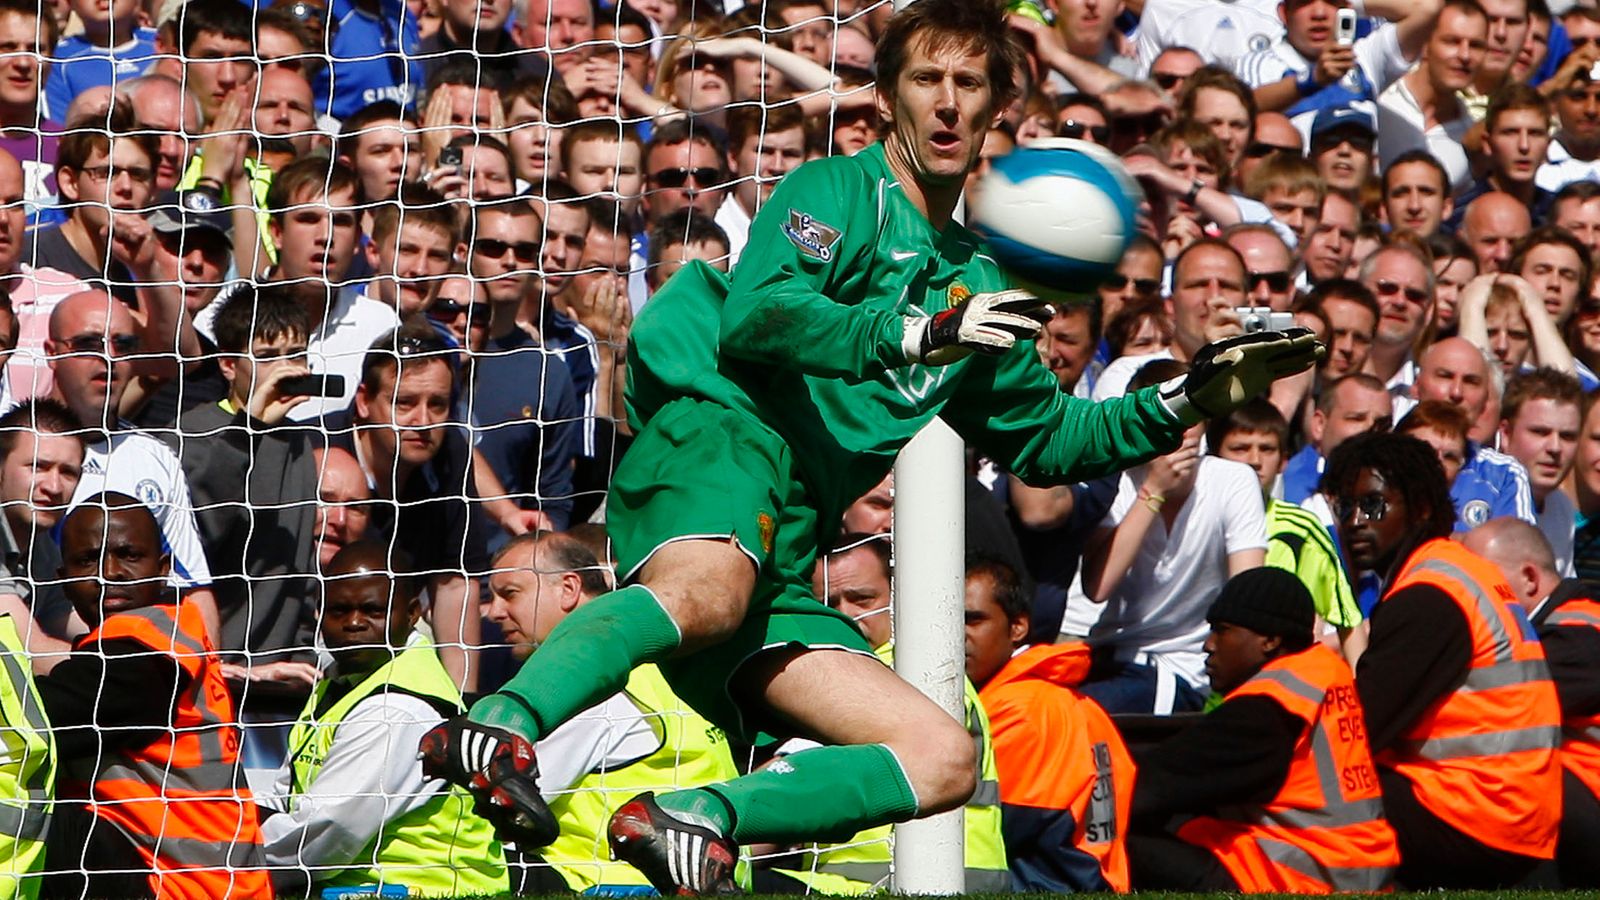 Former Manchester United star Edwin van der Sar remains in intensive care with condition 'still concerning'